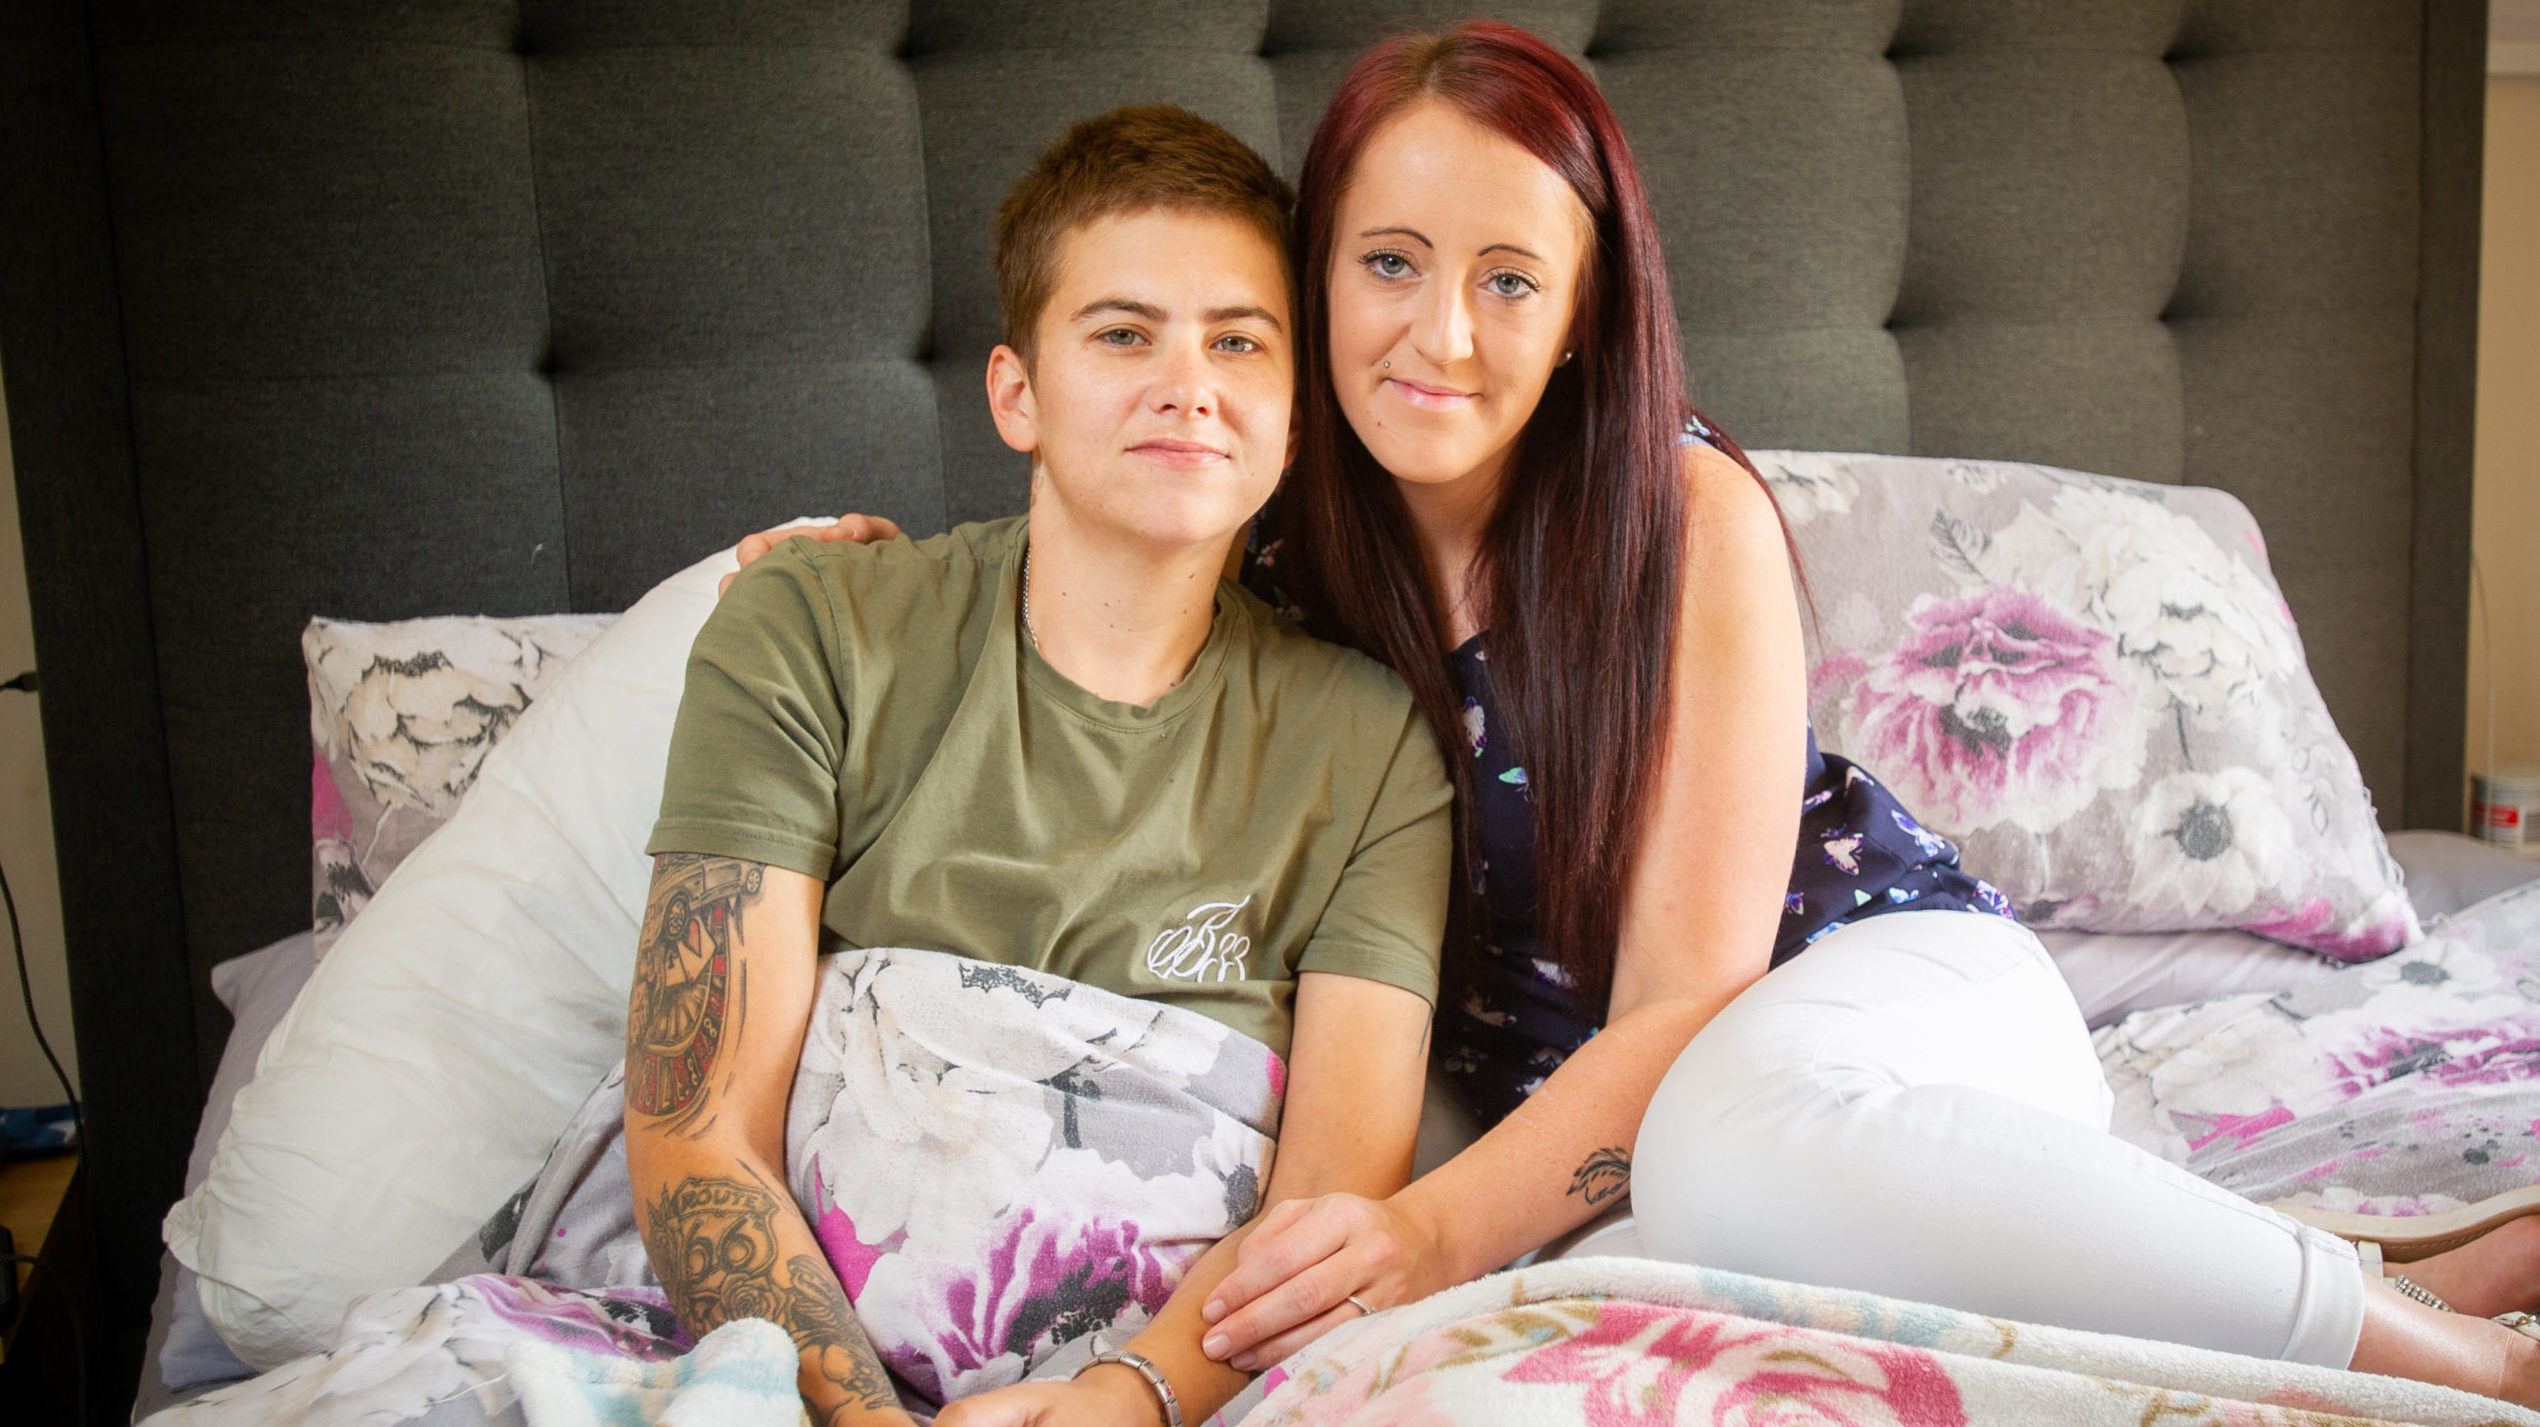 Kirsty Maxwell and her fiancee Nadia Huggan are planning Kirsty's funeral after she was diagnosed with a rare cancer and was given only months to live.